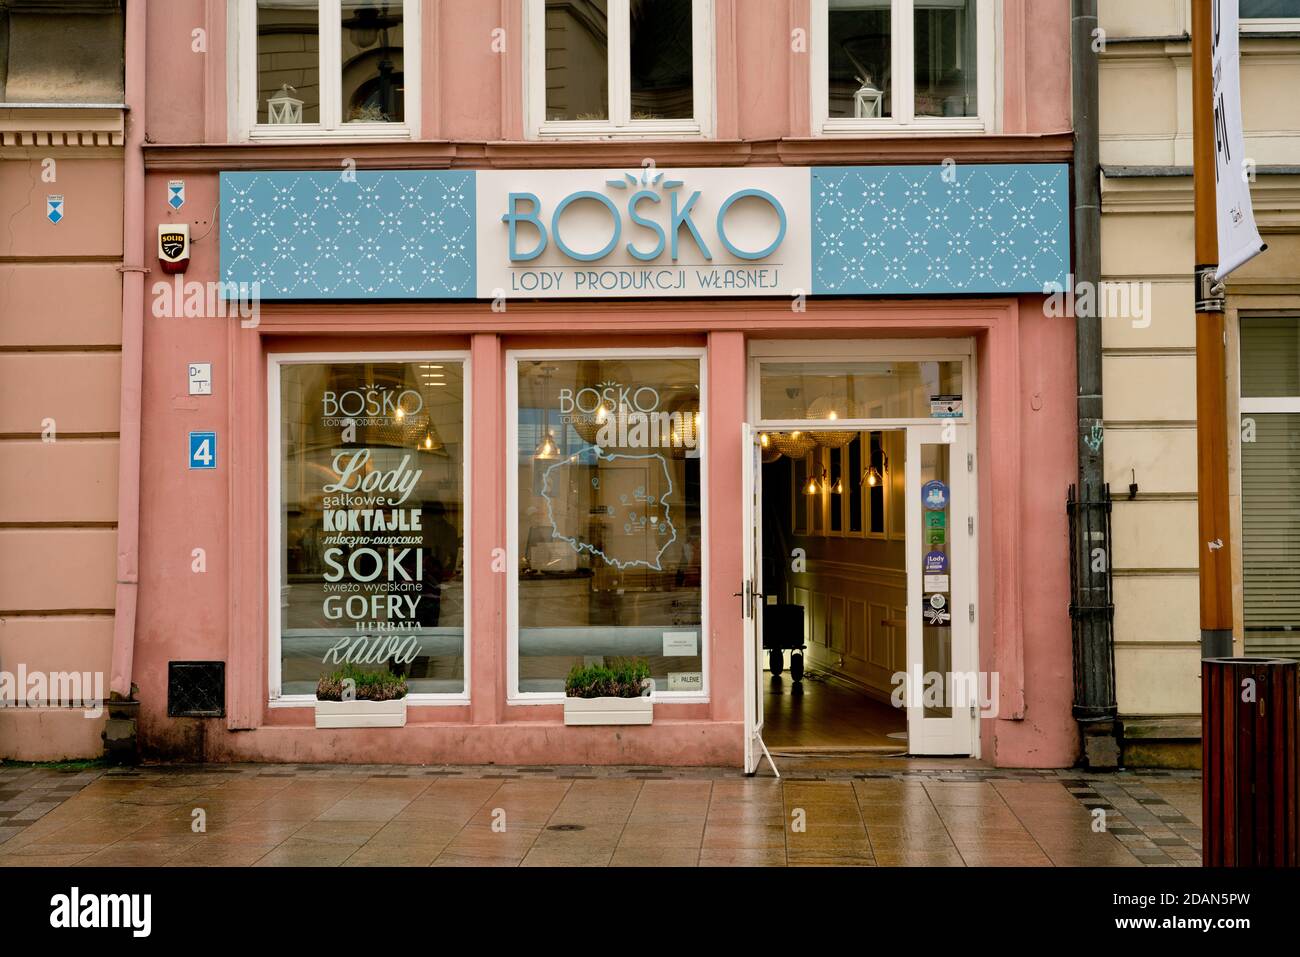 Storefront of a popular ice cream shop, Bosko, in Lublin, Poland Stock Photo